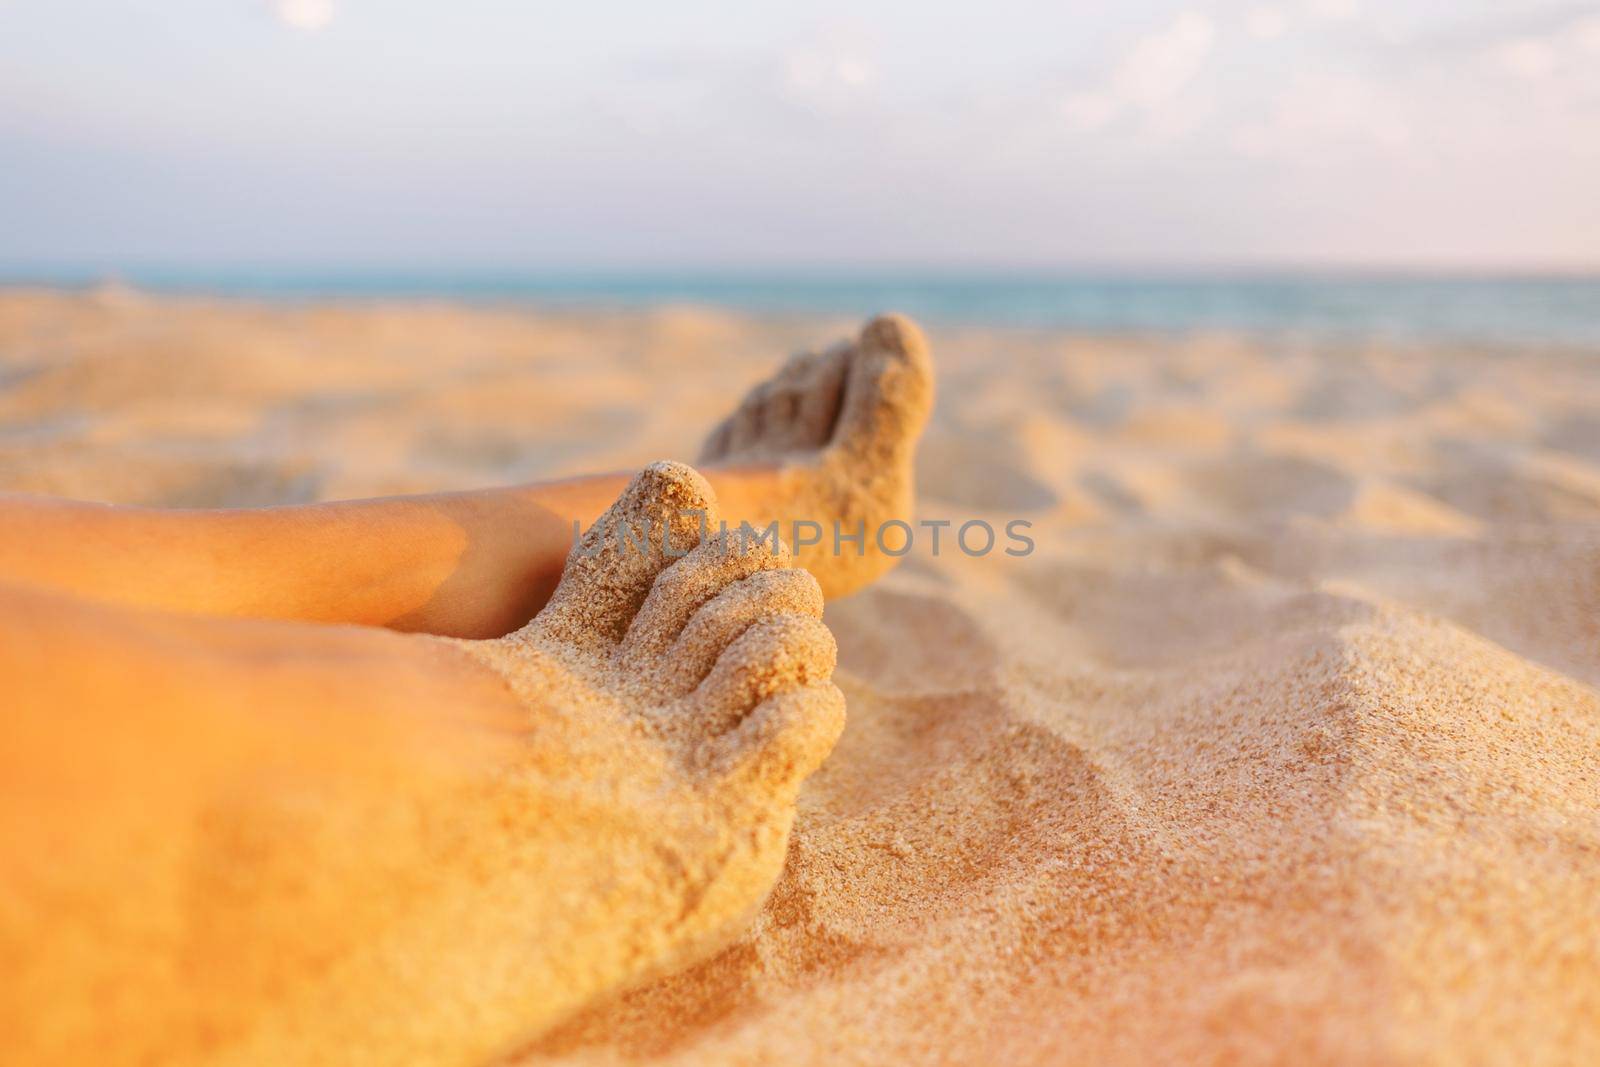 Woman resting on beach near the sea, close-up view of female barefoot legs on sand.